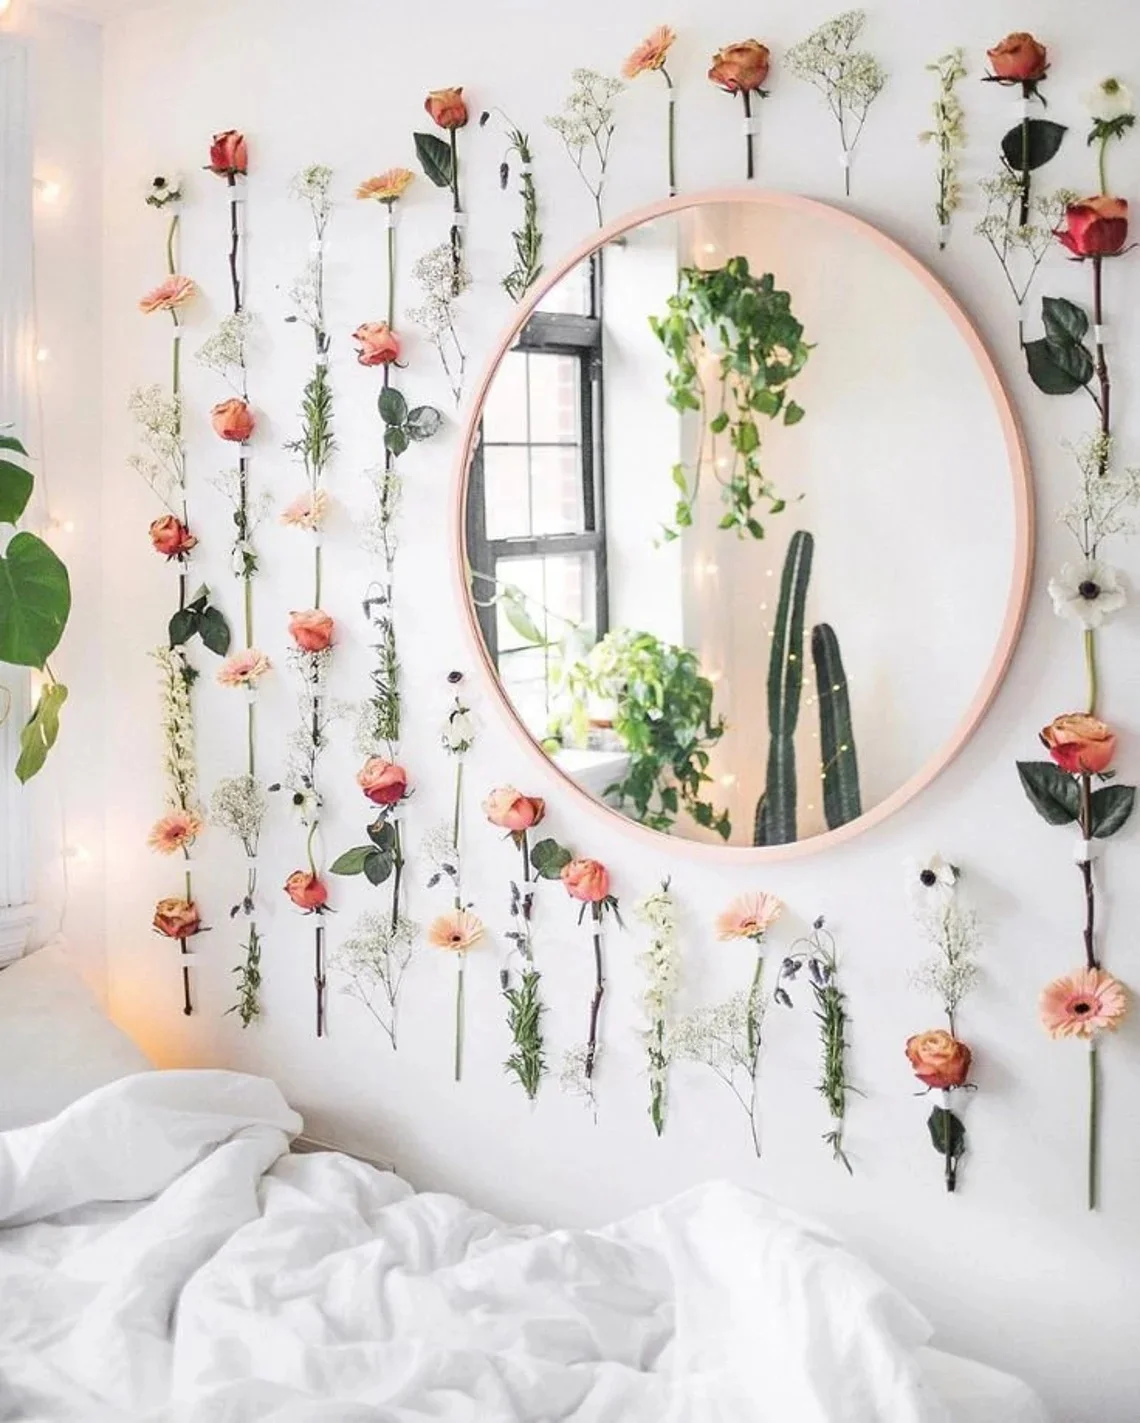 Faux Flowers Wall Display